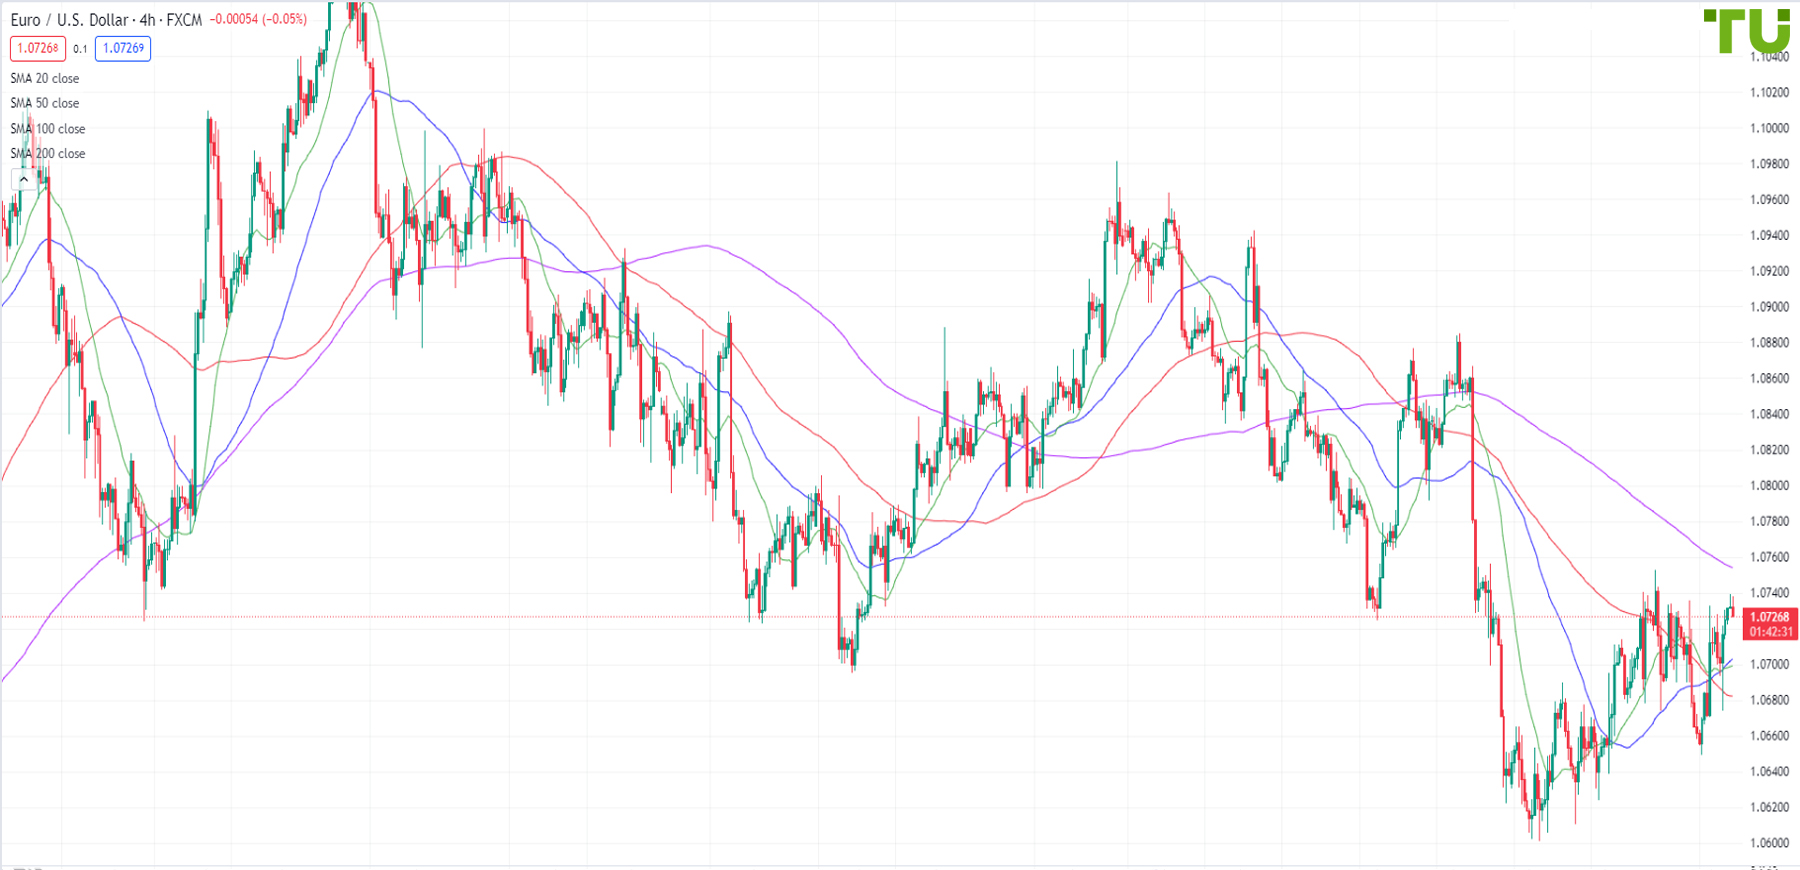 EUR/USD was bought again on the decline, giving bears reason to worry